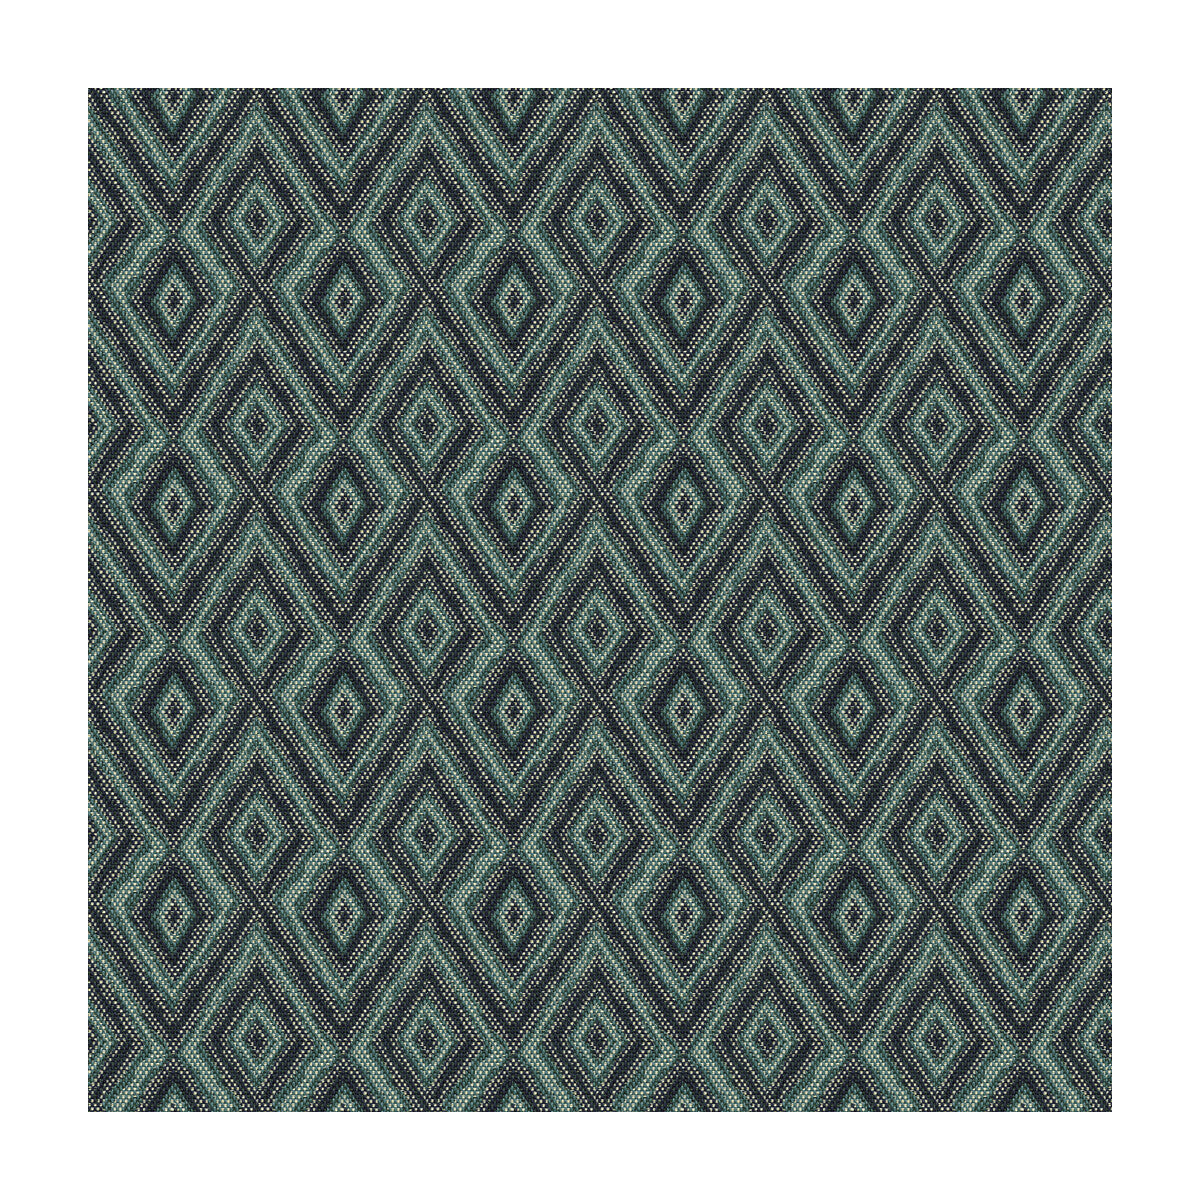 Kravet Design fabric in 33881-5 color - pattern 33881.5.0 - by Kravet Design in the Tanzania J Banks collection